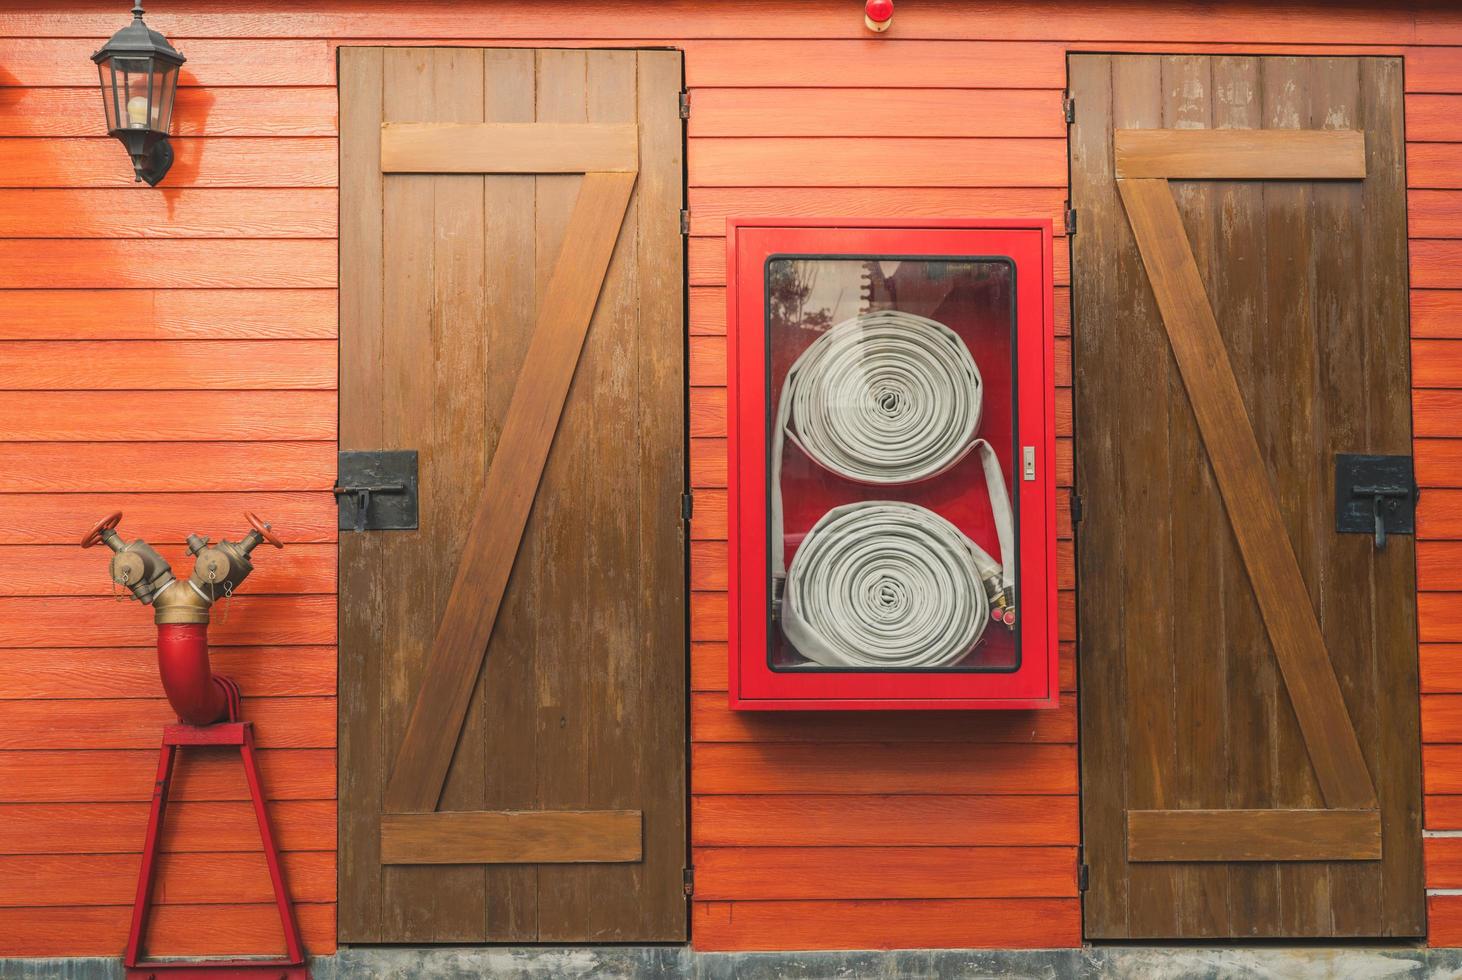 Fire hose in red cabinet hanging on orange wooden wall. Fire emergency equipment box for safety and security system. Fire safety pump. Deluge system of firefighting system. Plumbing fire protection. photo